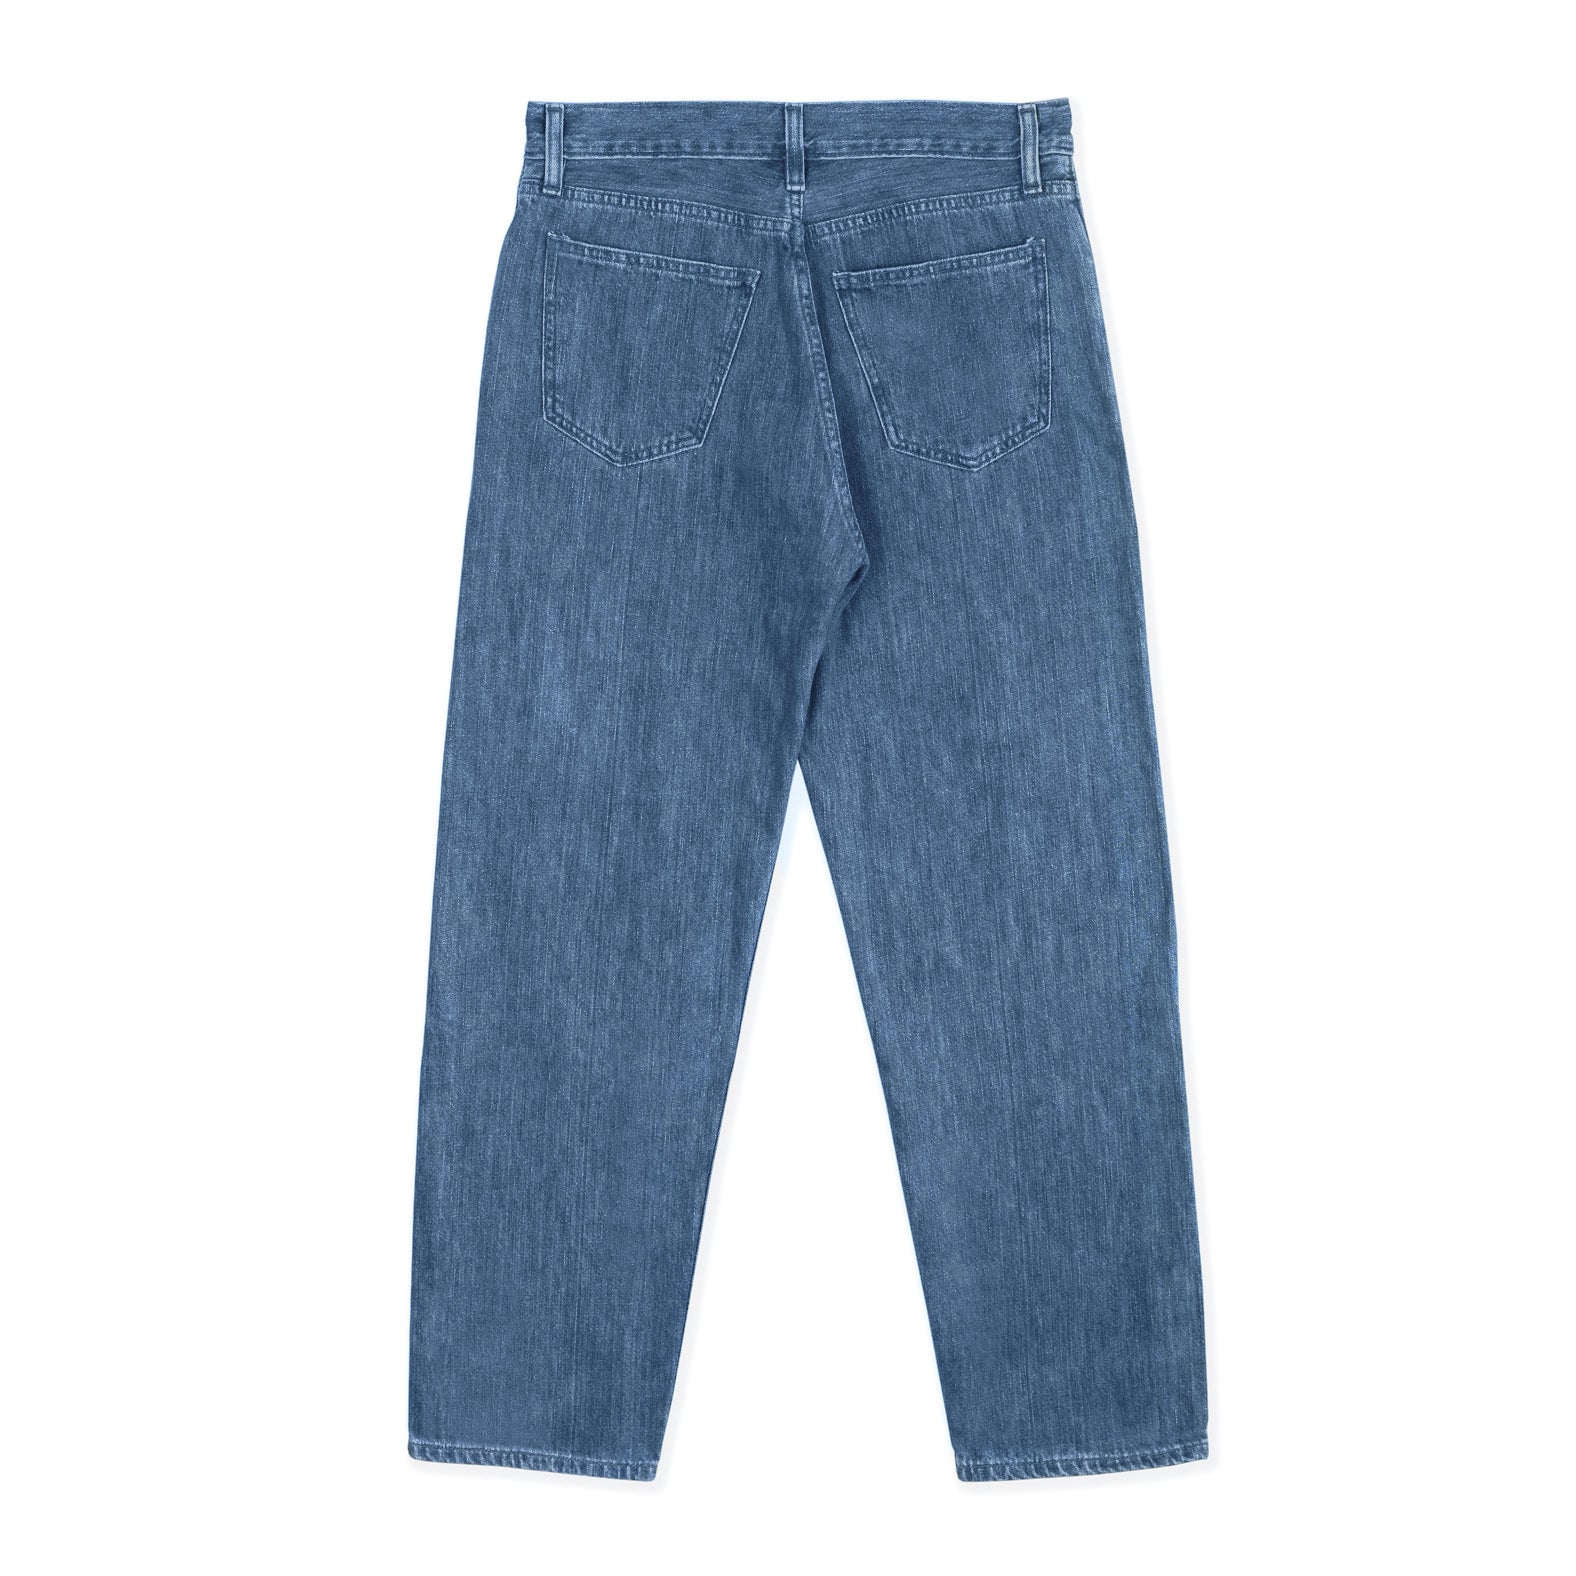 Tommy Bahama Relaxed Cayman Jeans 32x32 | Men jeans relaxed, Denim jeans  men, Relaxed fit jeans